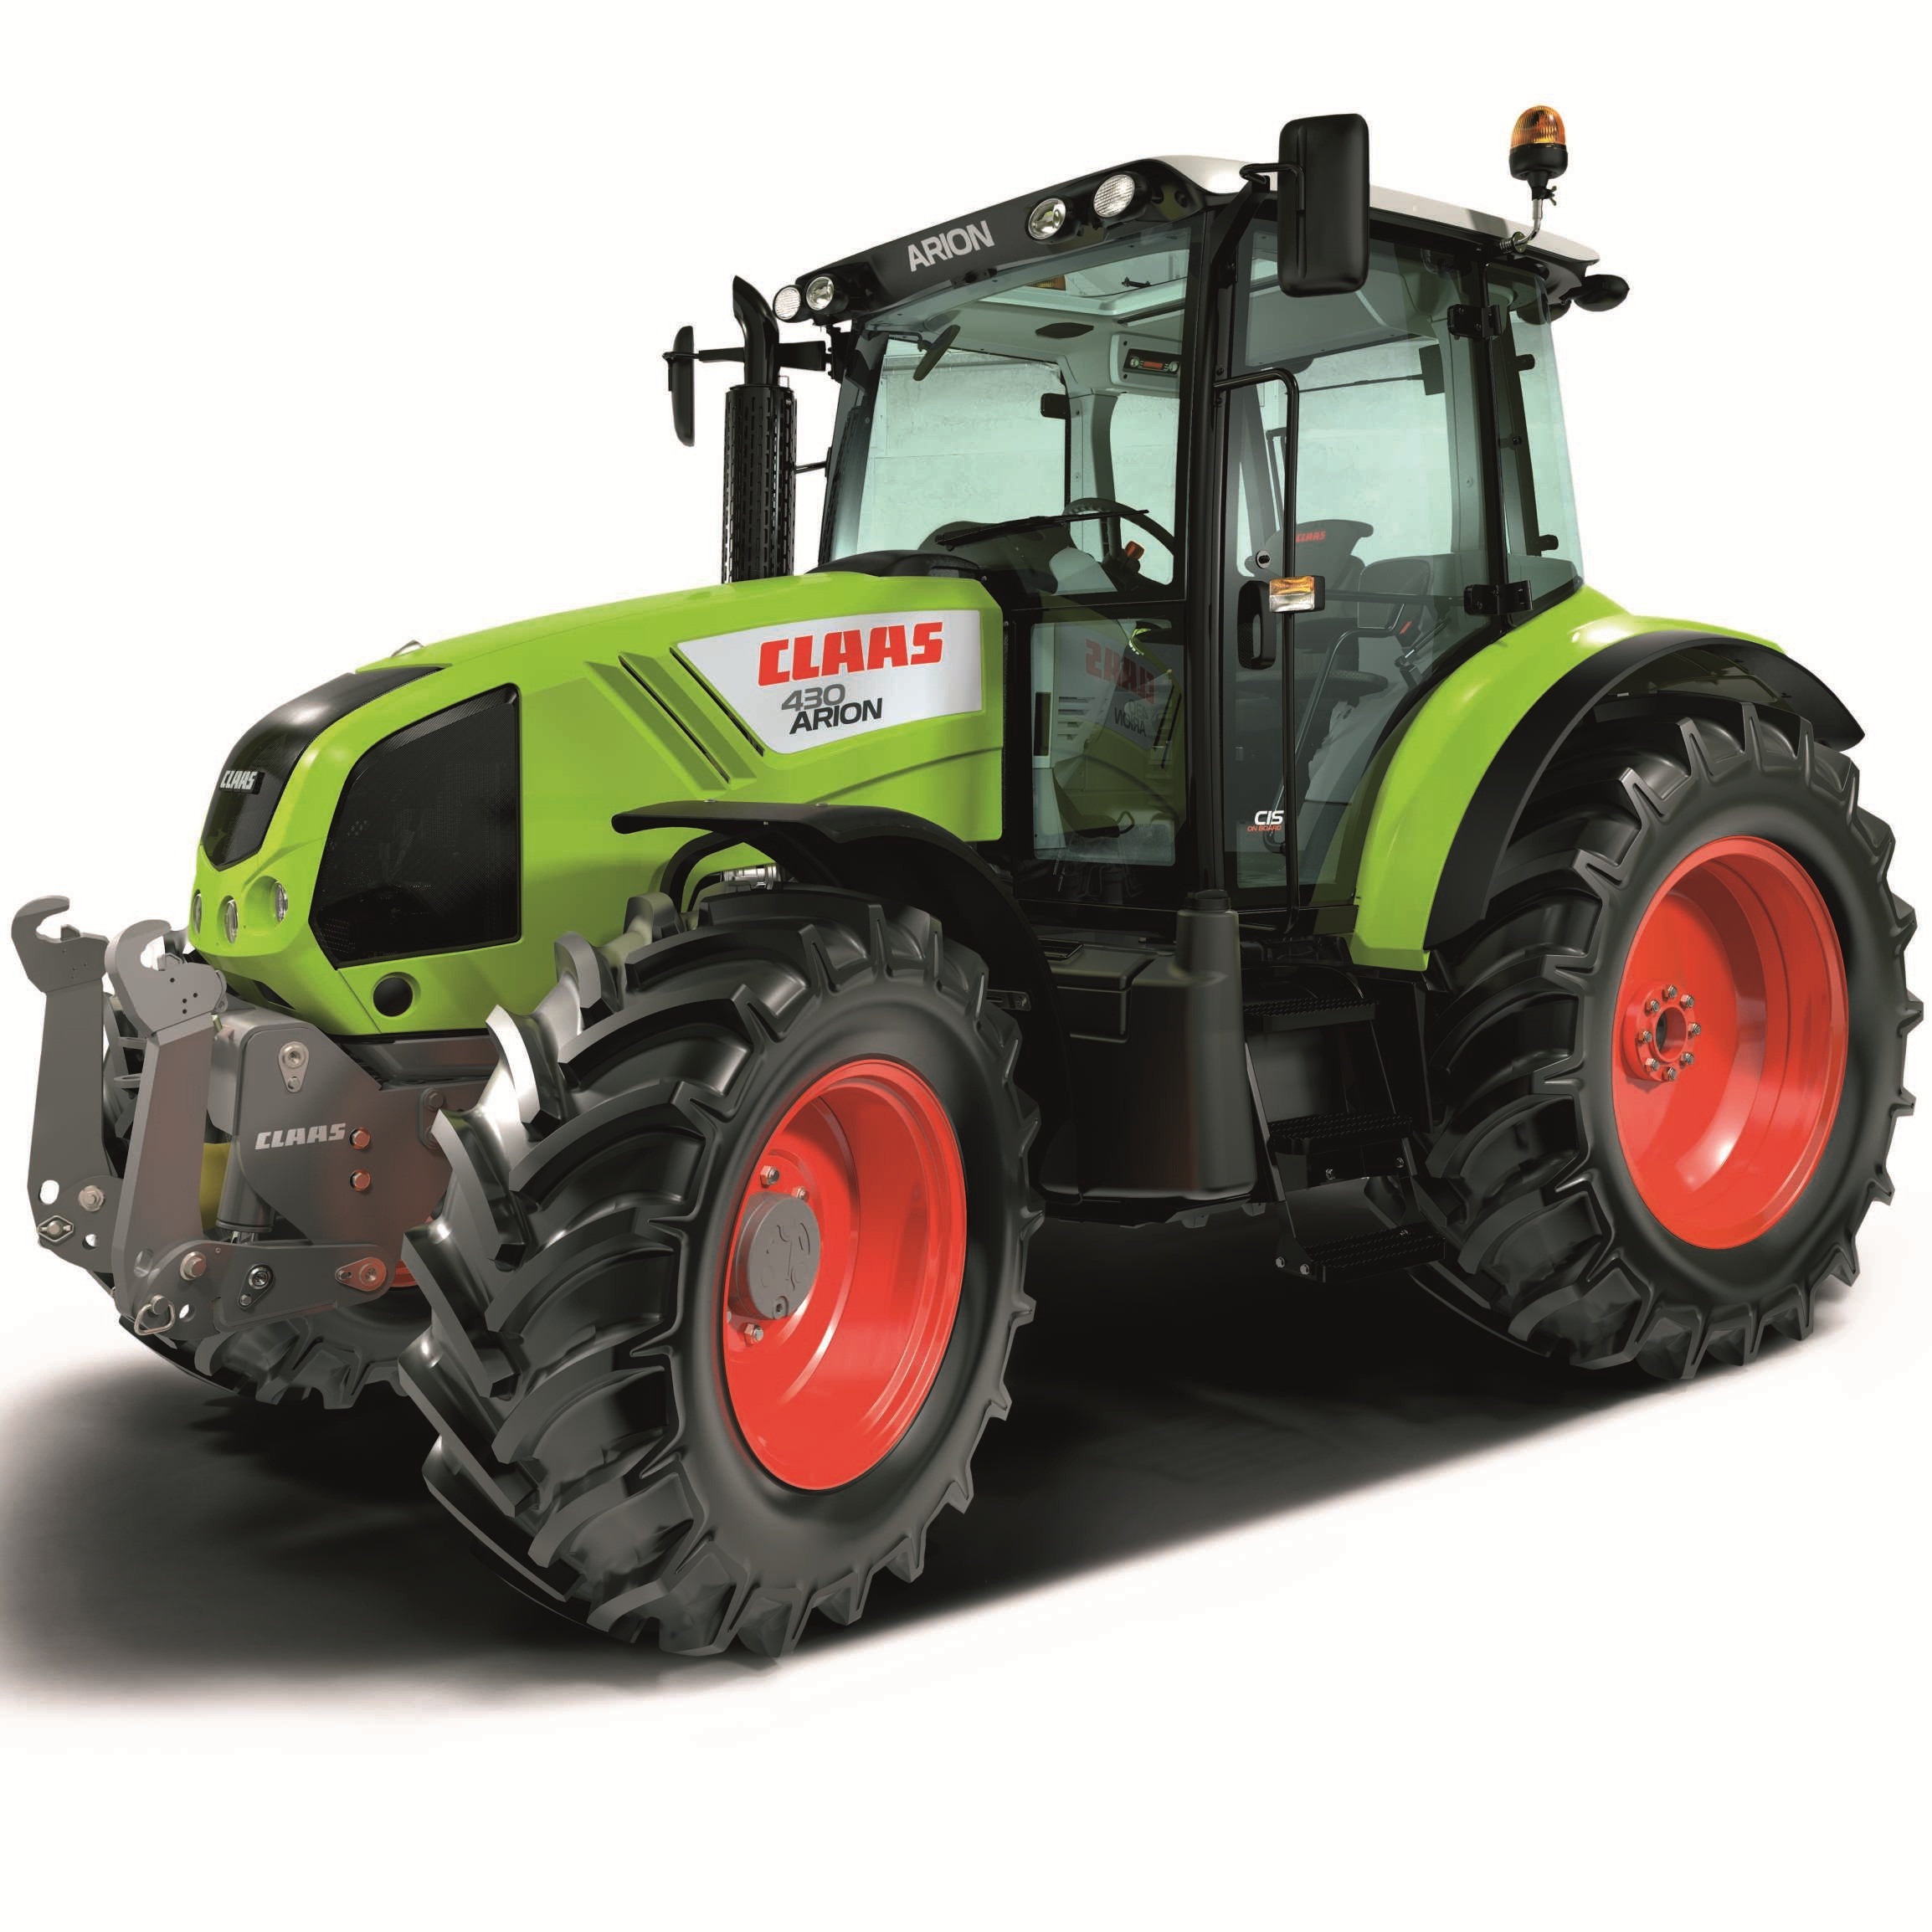 Fichiers Tuning Haute Qualité Claas Tractor Arion 430 4-4525 CR JD i-EGR 114hp